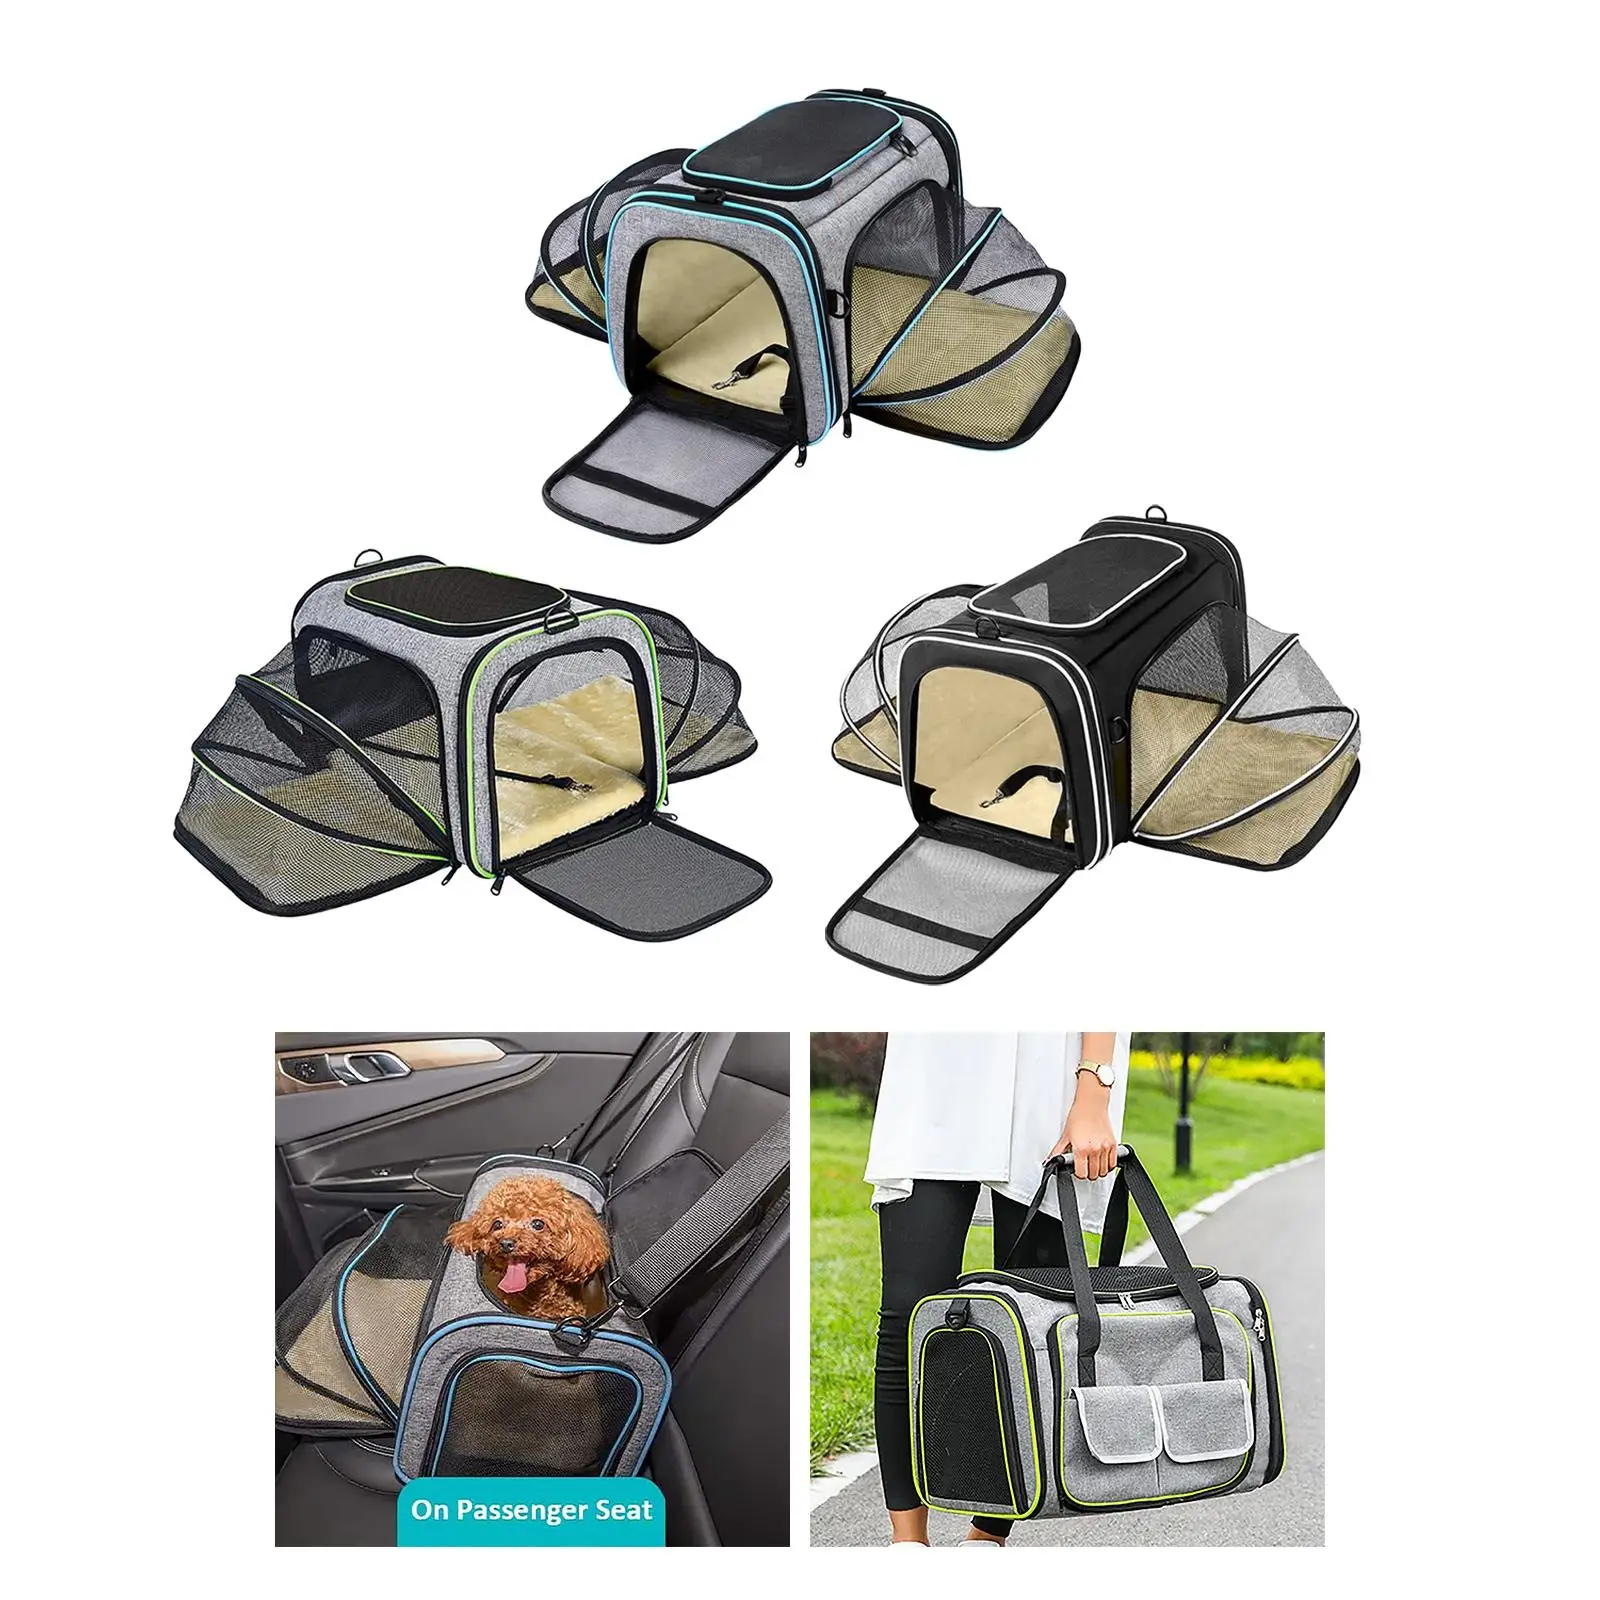 Pet Carrier Expandable Dog Cat Soft Sided Travel Transport Bag with Pockets